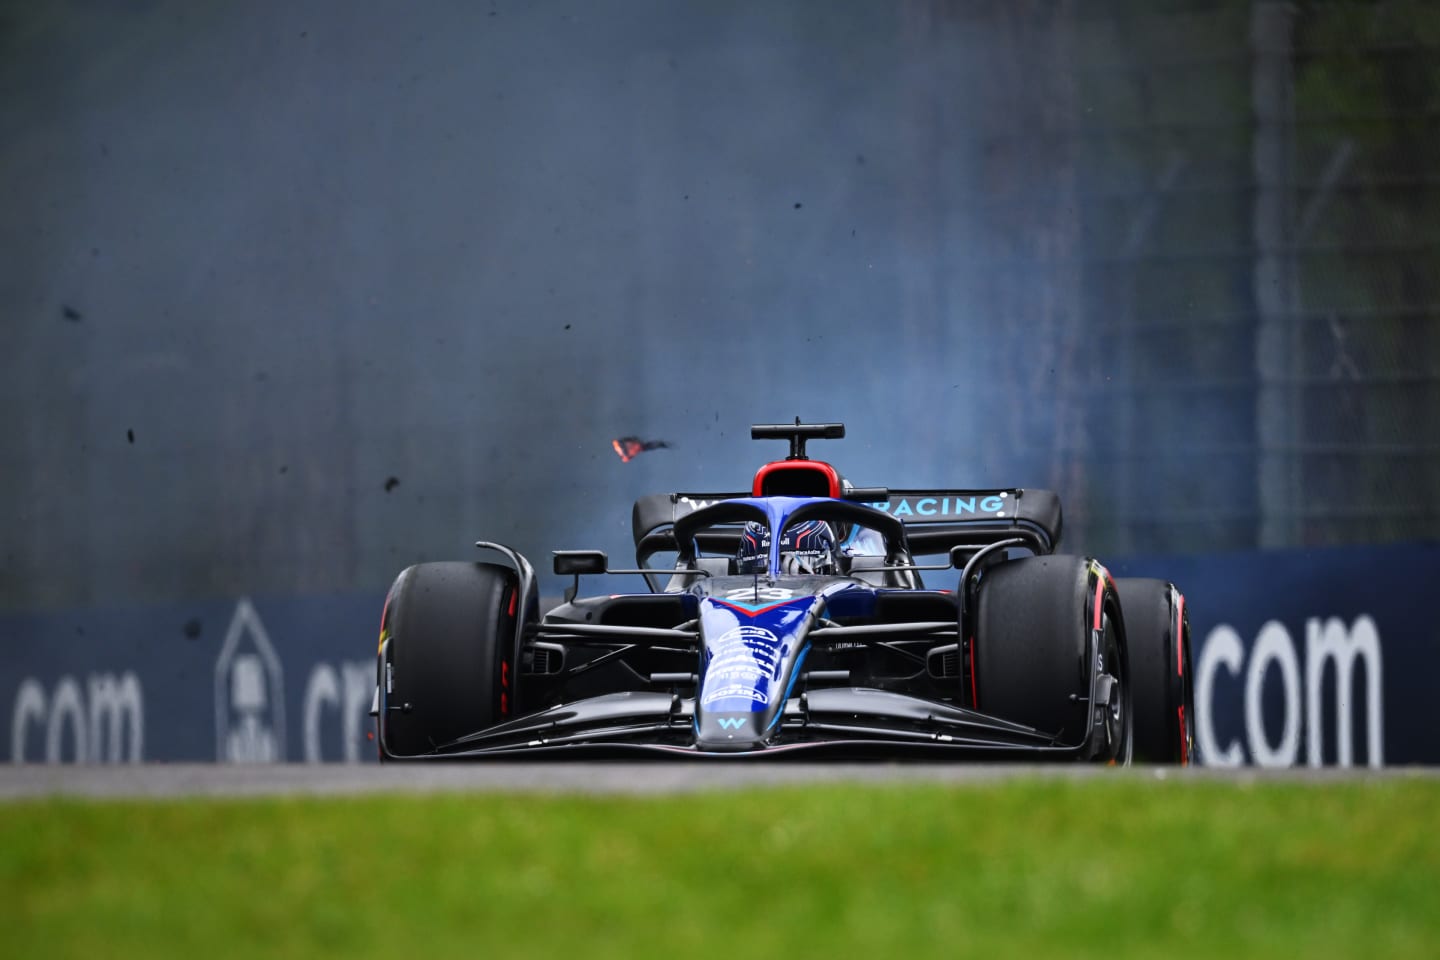 IMOLA, ITALY - APRIL 22: The brakes of Alexander Albon of Thailand driving the (23) Williams FW44 Mercedes explode on track during qualifying ahead of the F1 Grand Prix of Emilia Romagna at Autodromo Enzo e Dino Ferrari on April 22, 2022 in Imola, Italy. (Photo by Clive Mason/Getty Images)